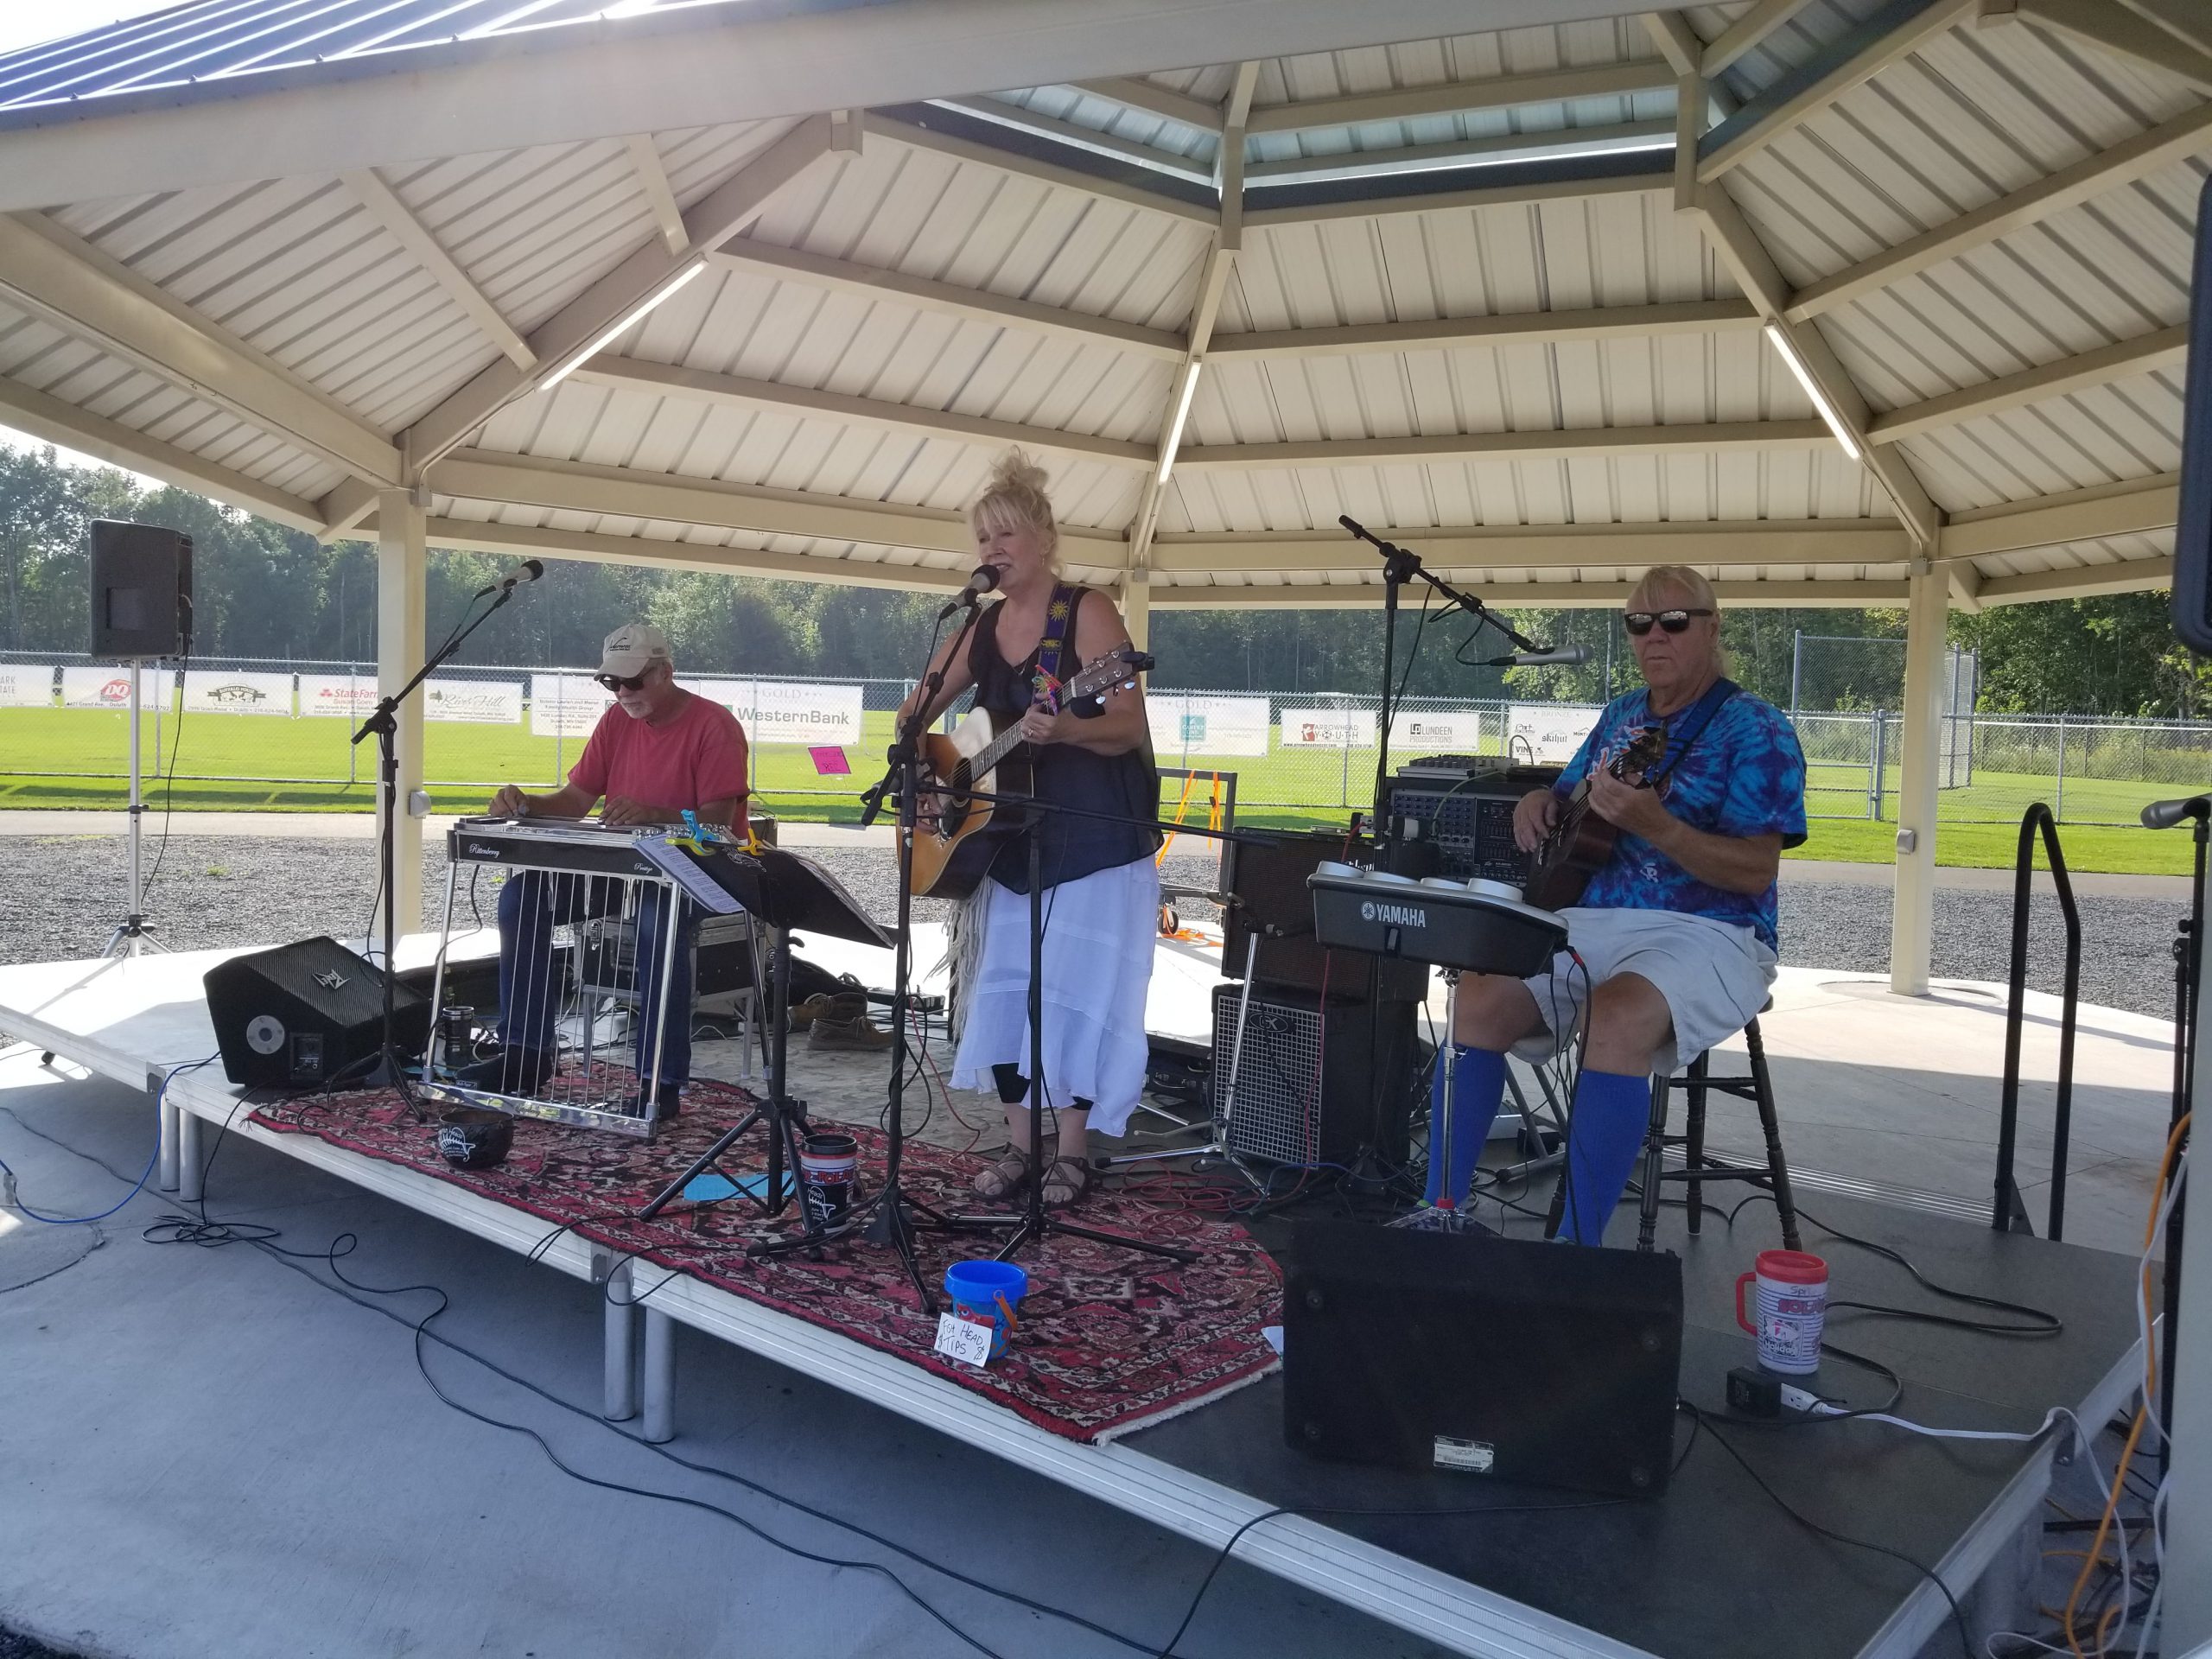 Two men playing keyboard and ukulele sit while a woman stands and sings at the Pavilion at the GND REC